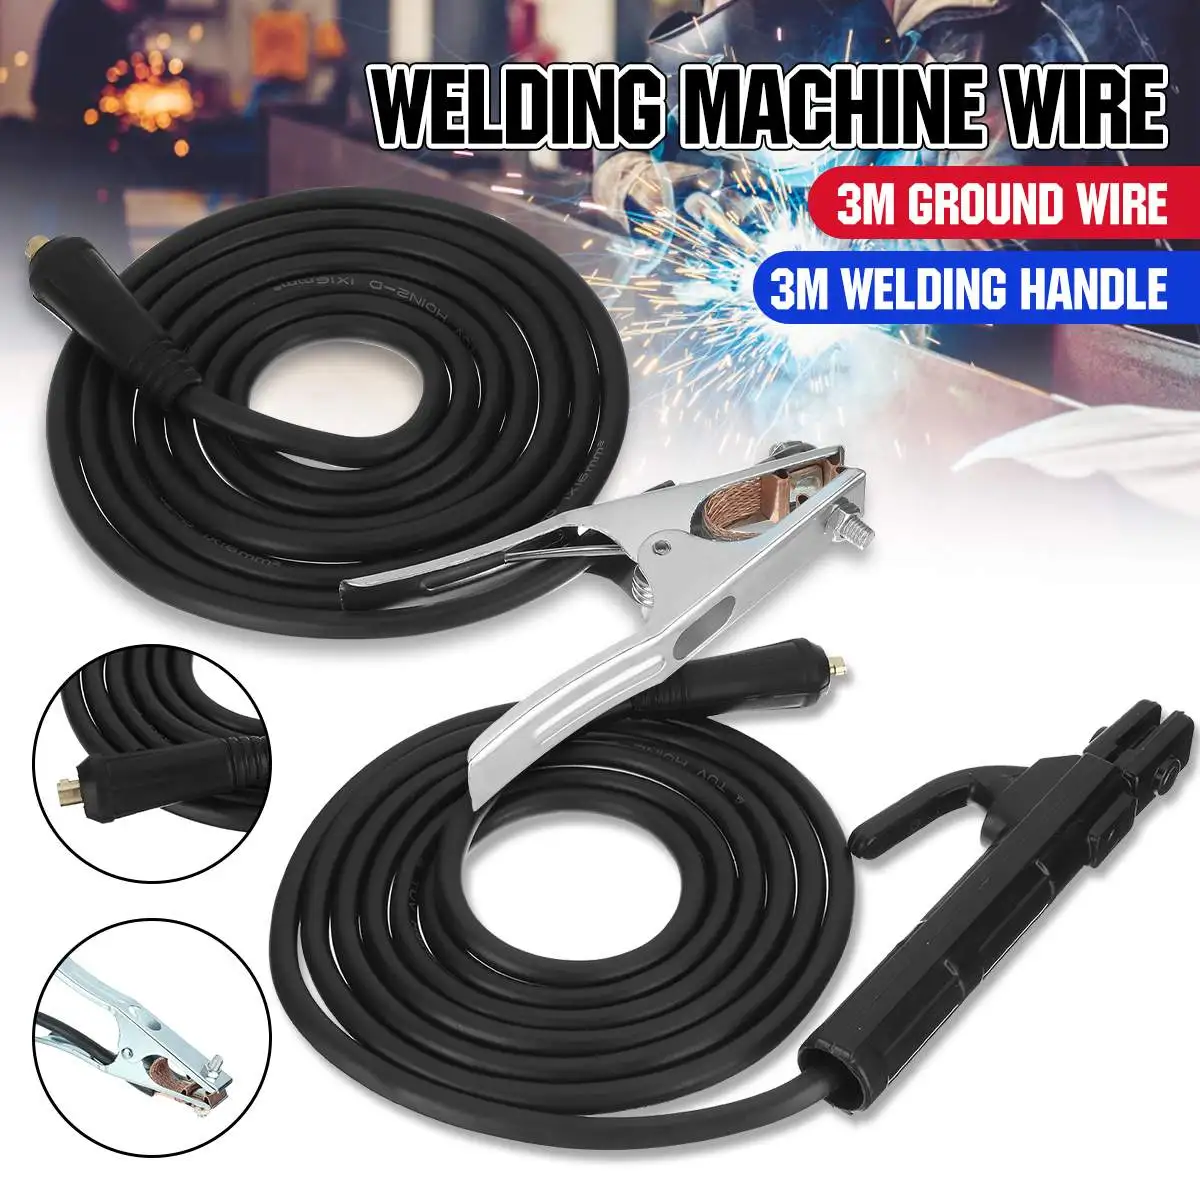 

200A Professional Groud Welding Earth Clamp Clip Set For Mig Tig ARC Welding Machine Electrode Holder Cable + Earth Clamp Cable